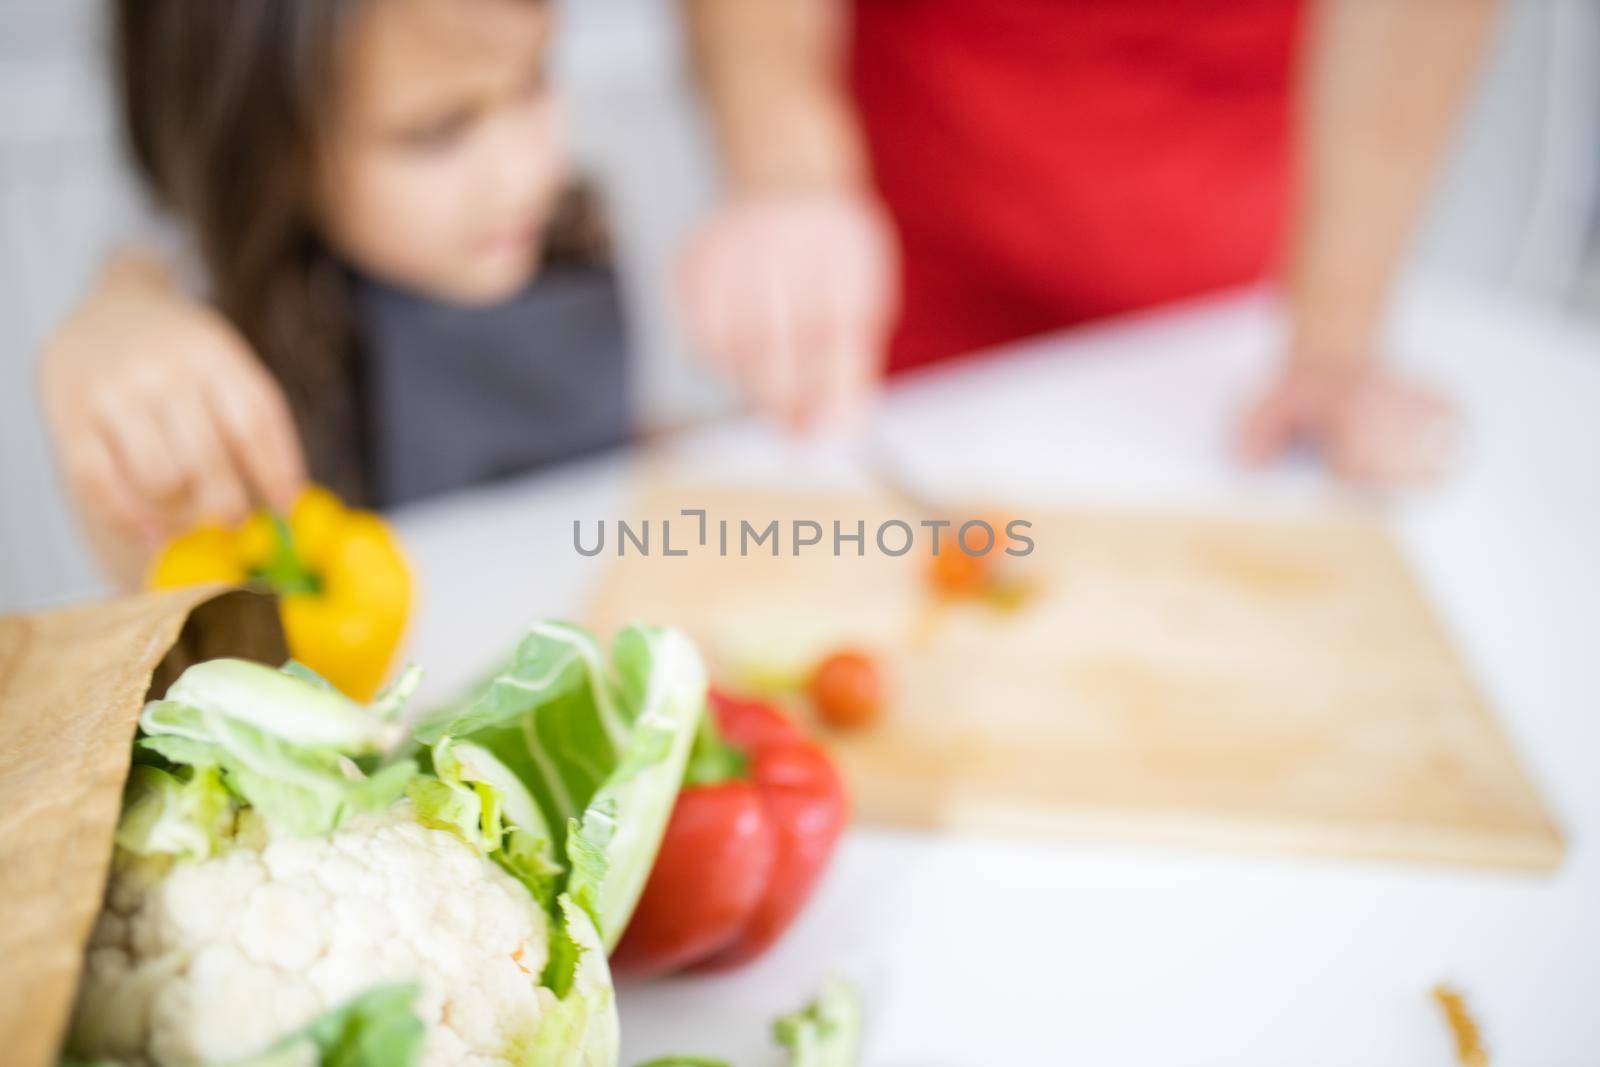 Blurry little girl and her father slicing cherry tomatoes on cutting board. Man helping young child cutting vegetables on wooden board. Daughter-father cooking together